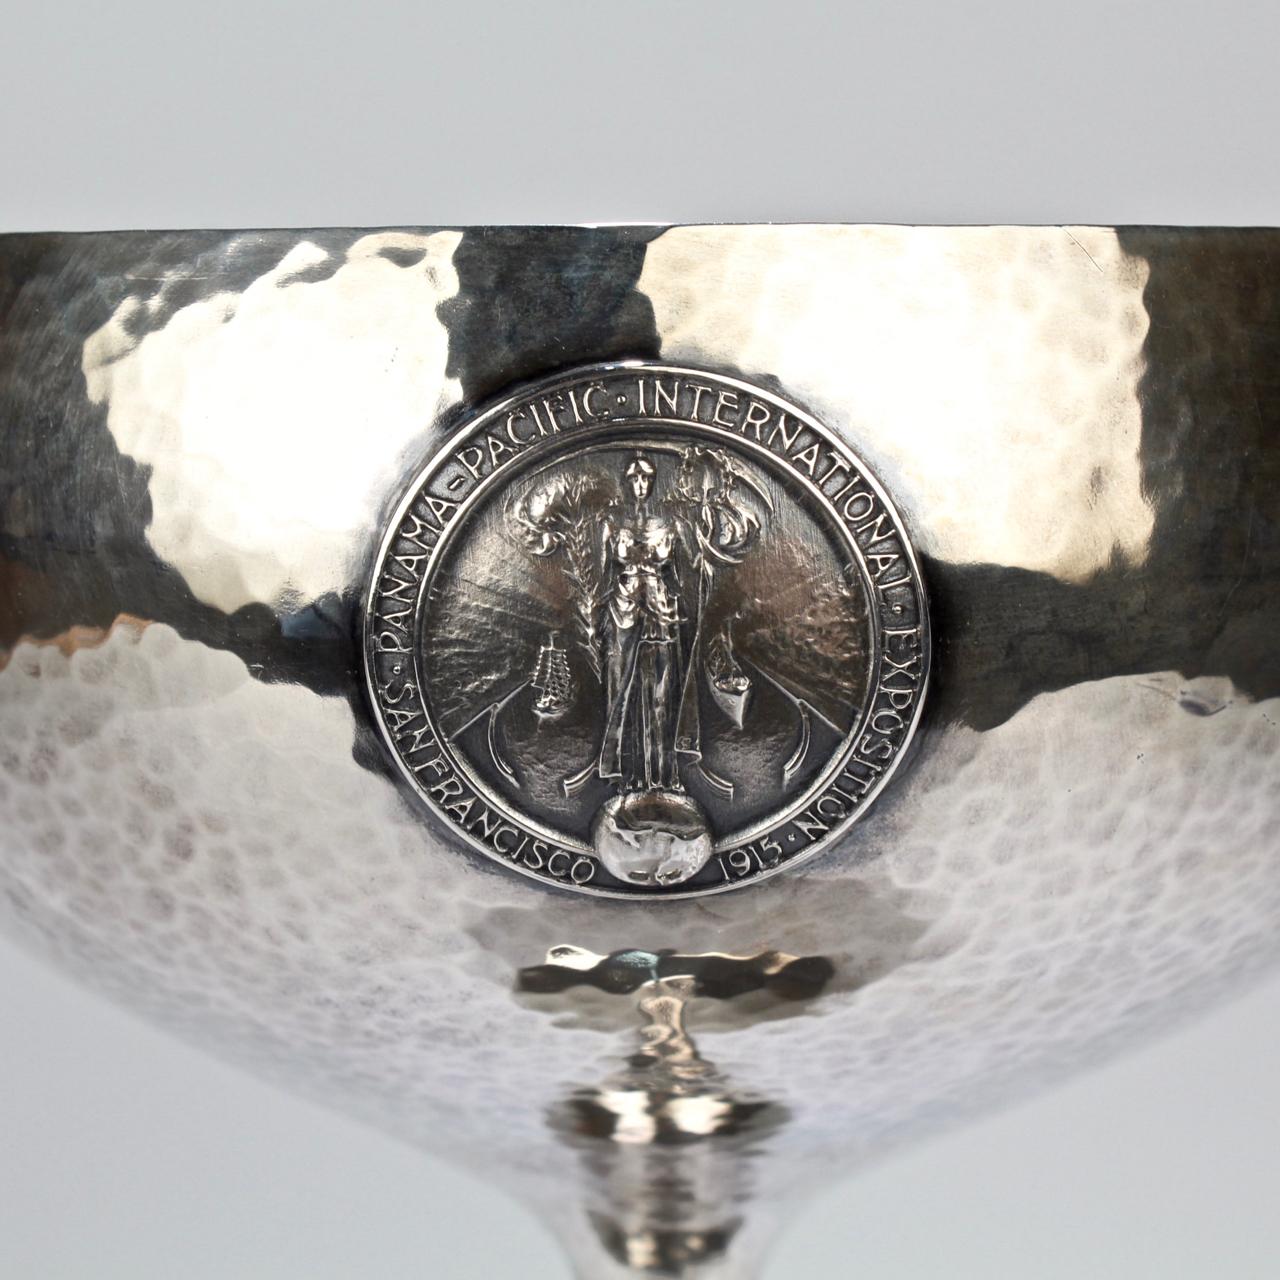 A wonderful art deco chalice-form trophy by Shreve & Co. With overall hand hammered decoration, the large cup is supported by a thin vasiform pedestal and foot.

Fashioned for the Templar Knights for the Panama-Pacific International Exposition, it